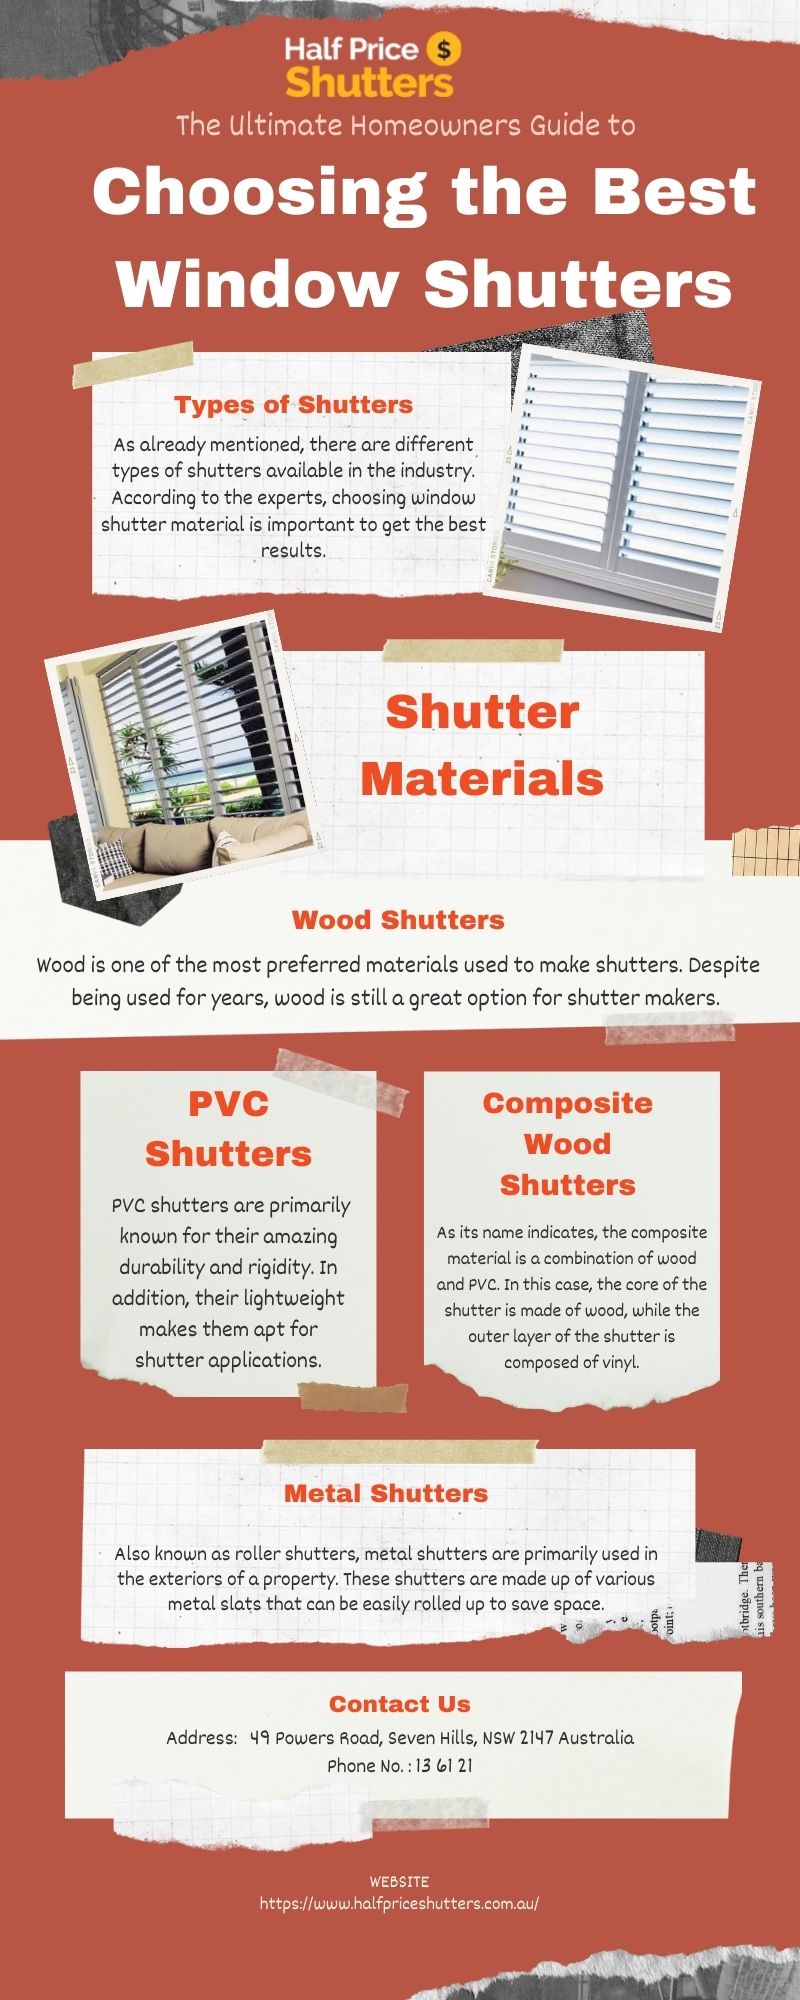 The Ultimate Homeowners Guide to Choosing the Best Window Shutters